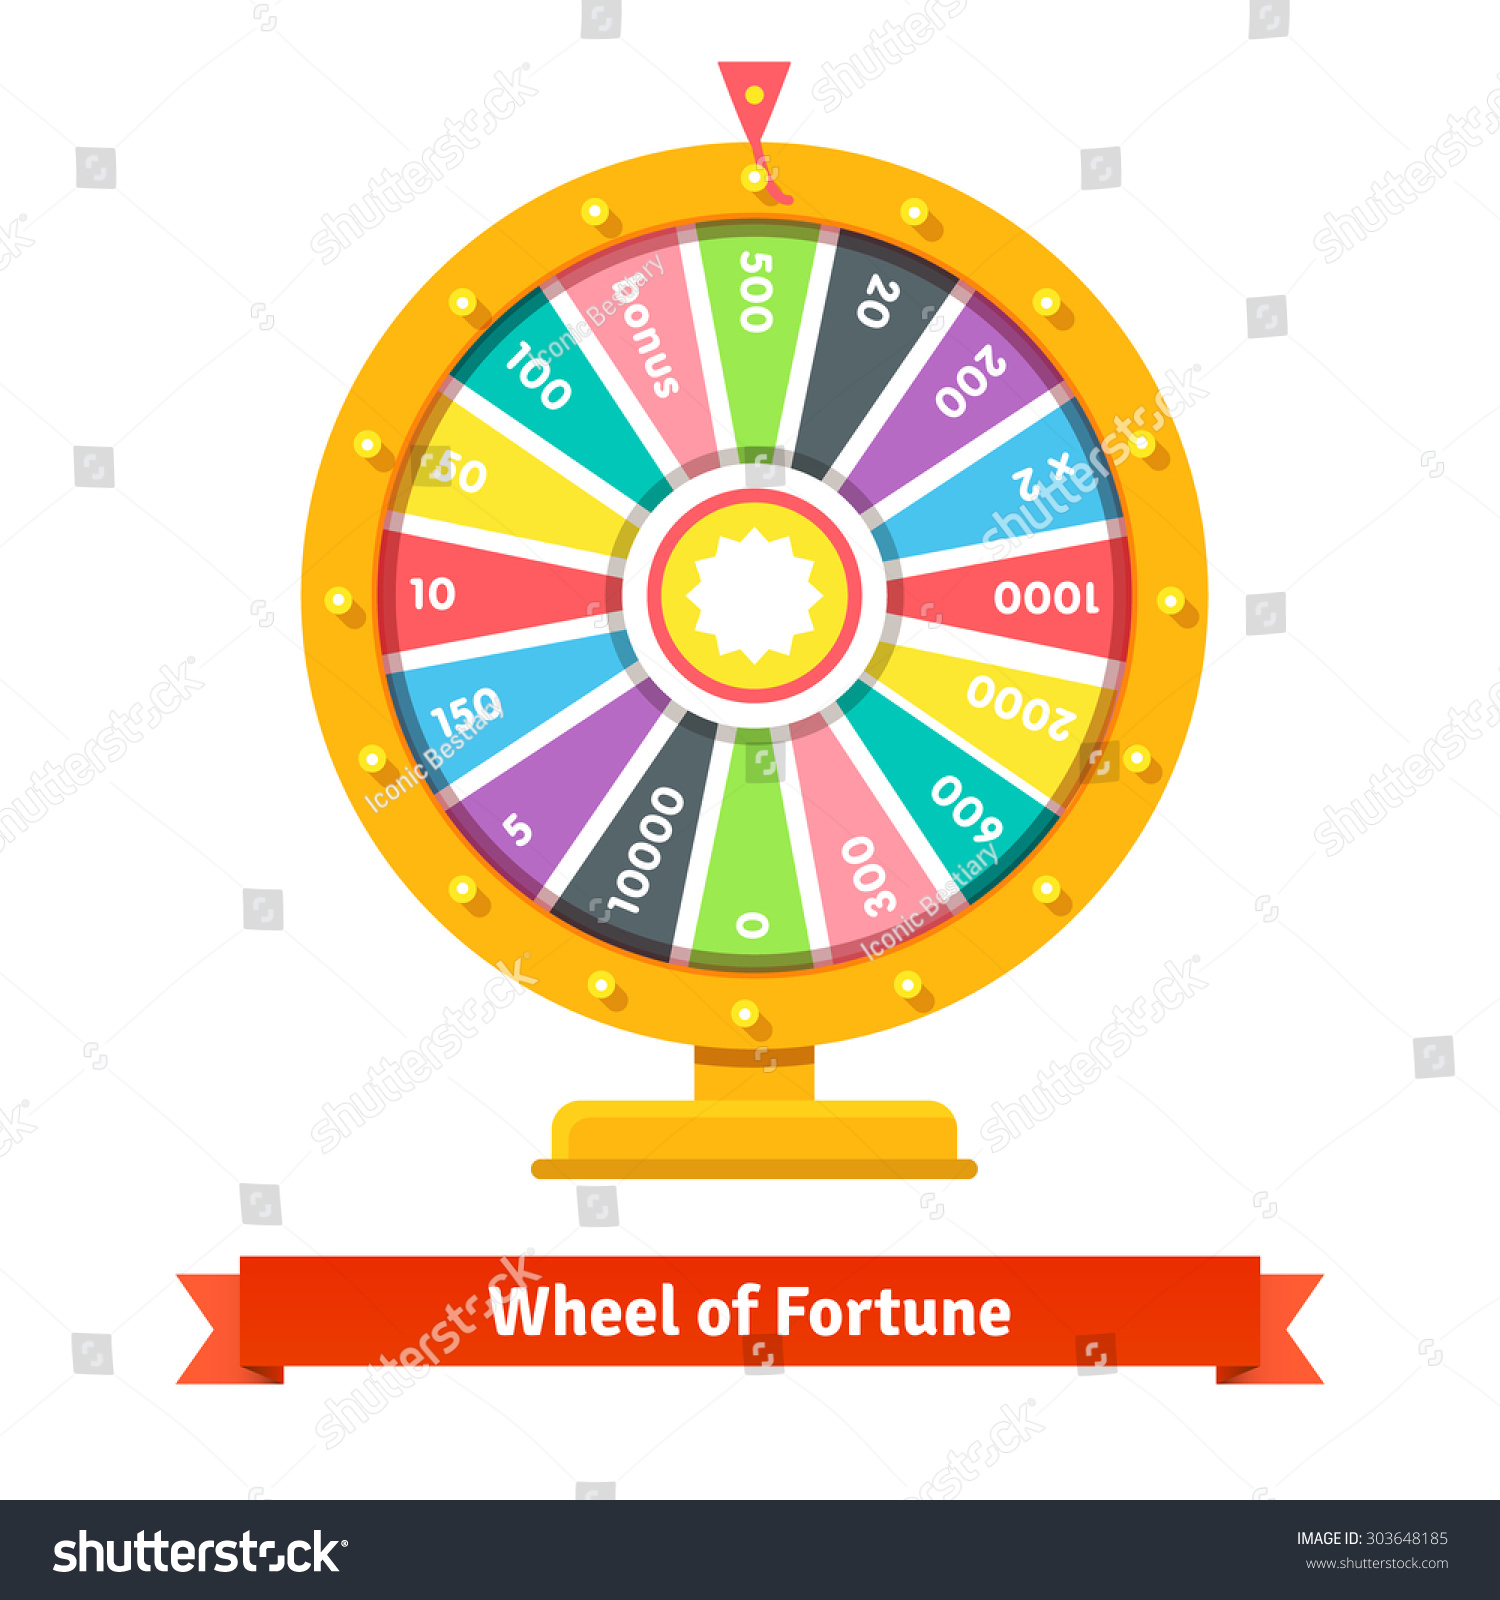 Wheel Fortune Number Bets Flat Style Stock Vector 303648185 - Shutterstock1500 x 1600